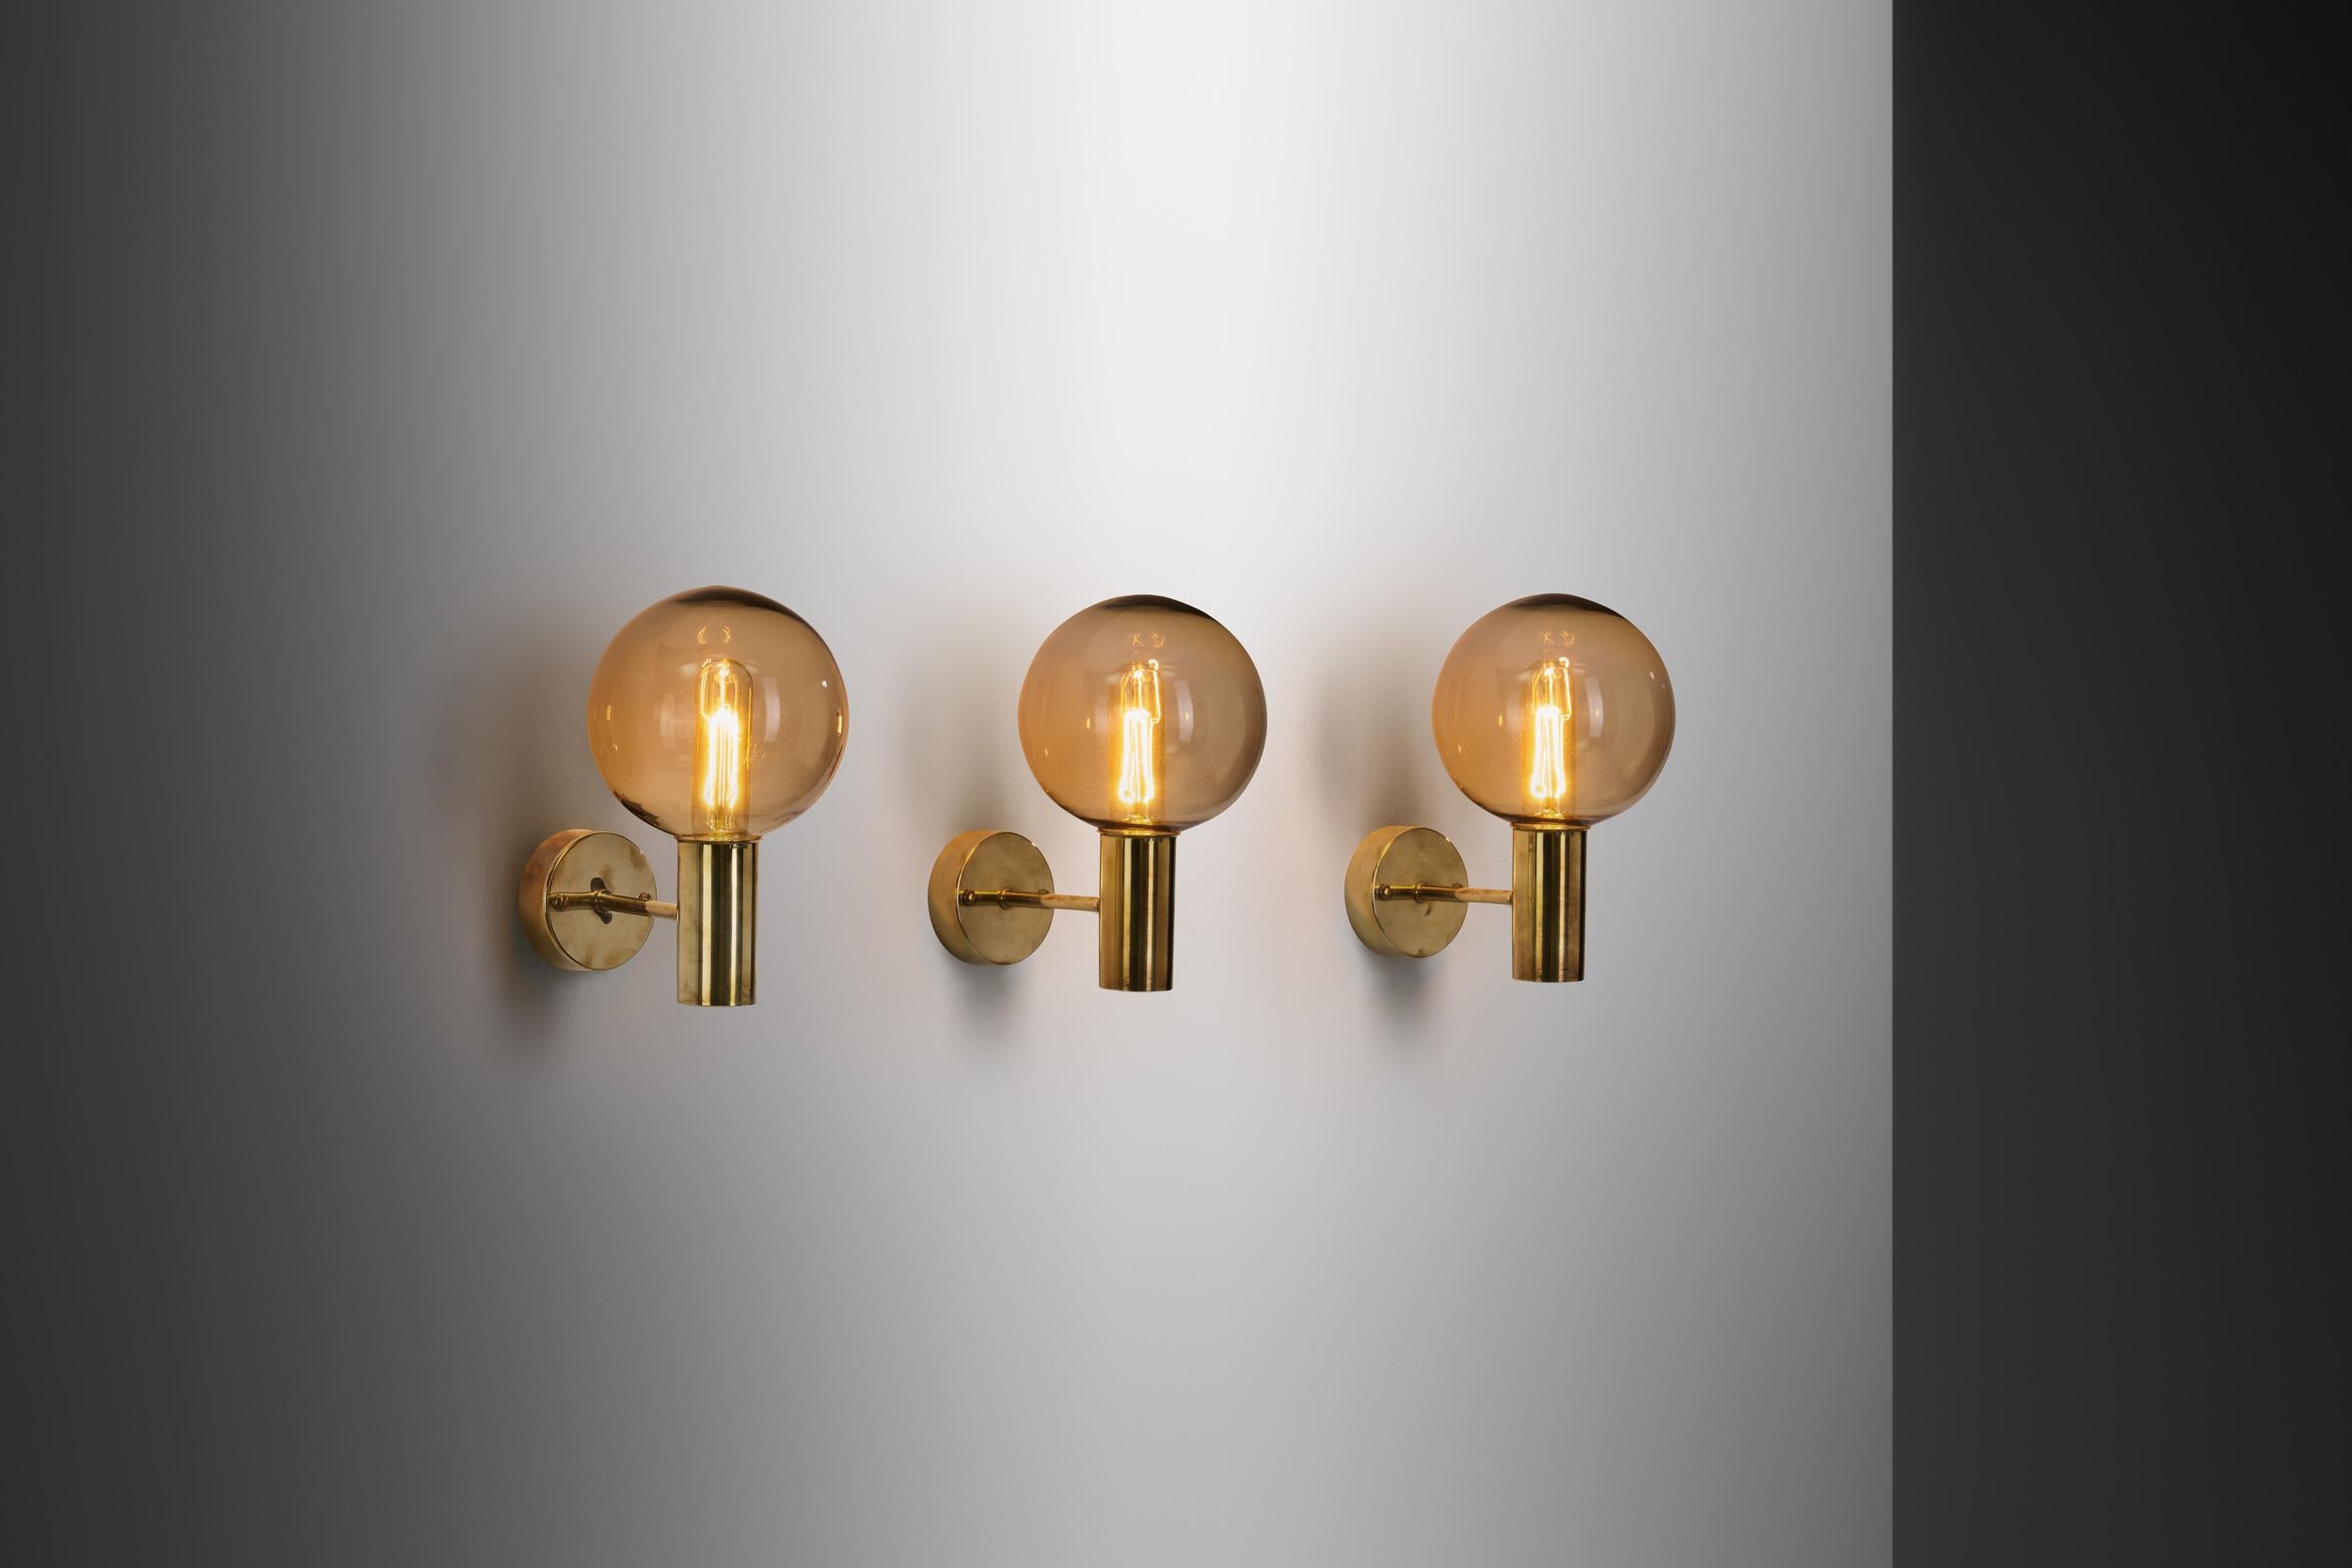 While Hans-Agne Jakobsson designed and produced various types of furniture, his lighting received greater international attention, not without a good reason. As these “V-149” wall sconces showcase, the Swedish designer mastered both the direction